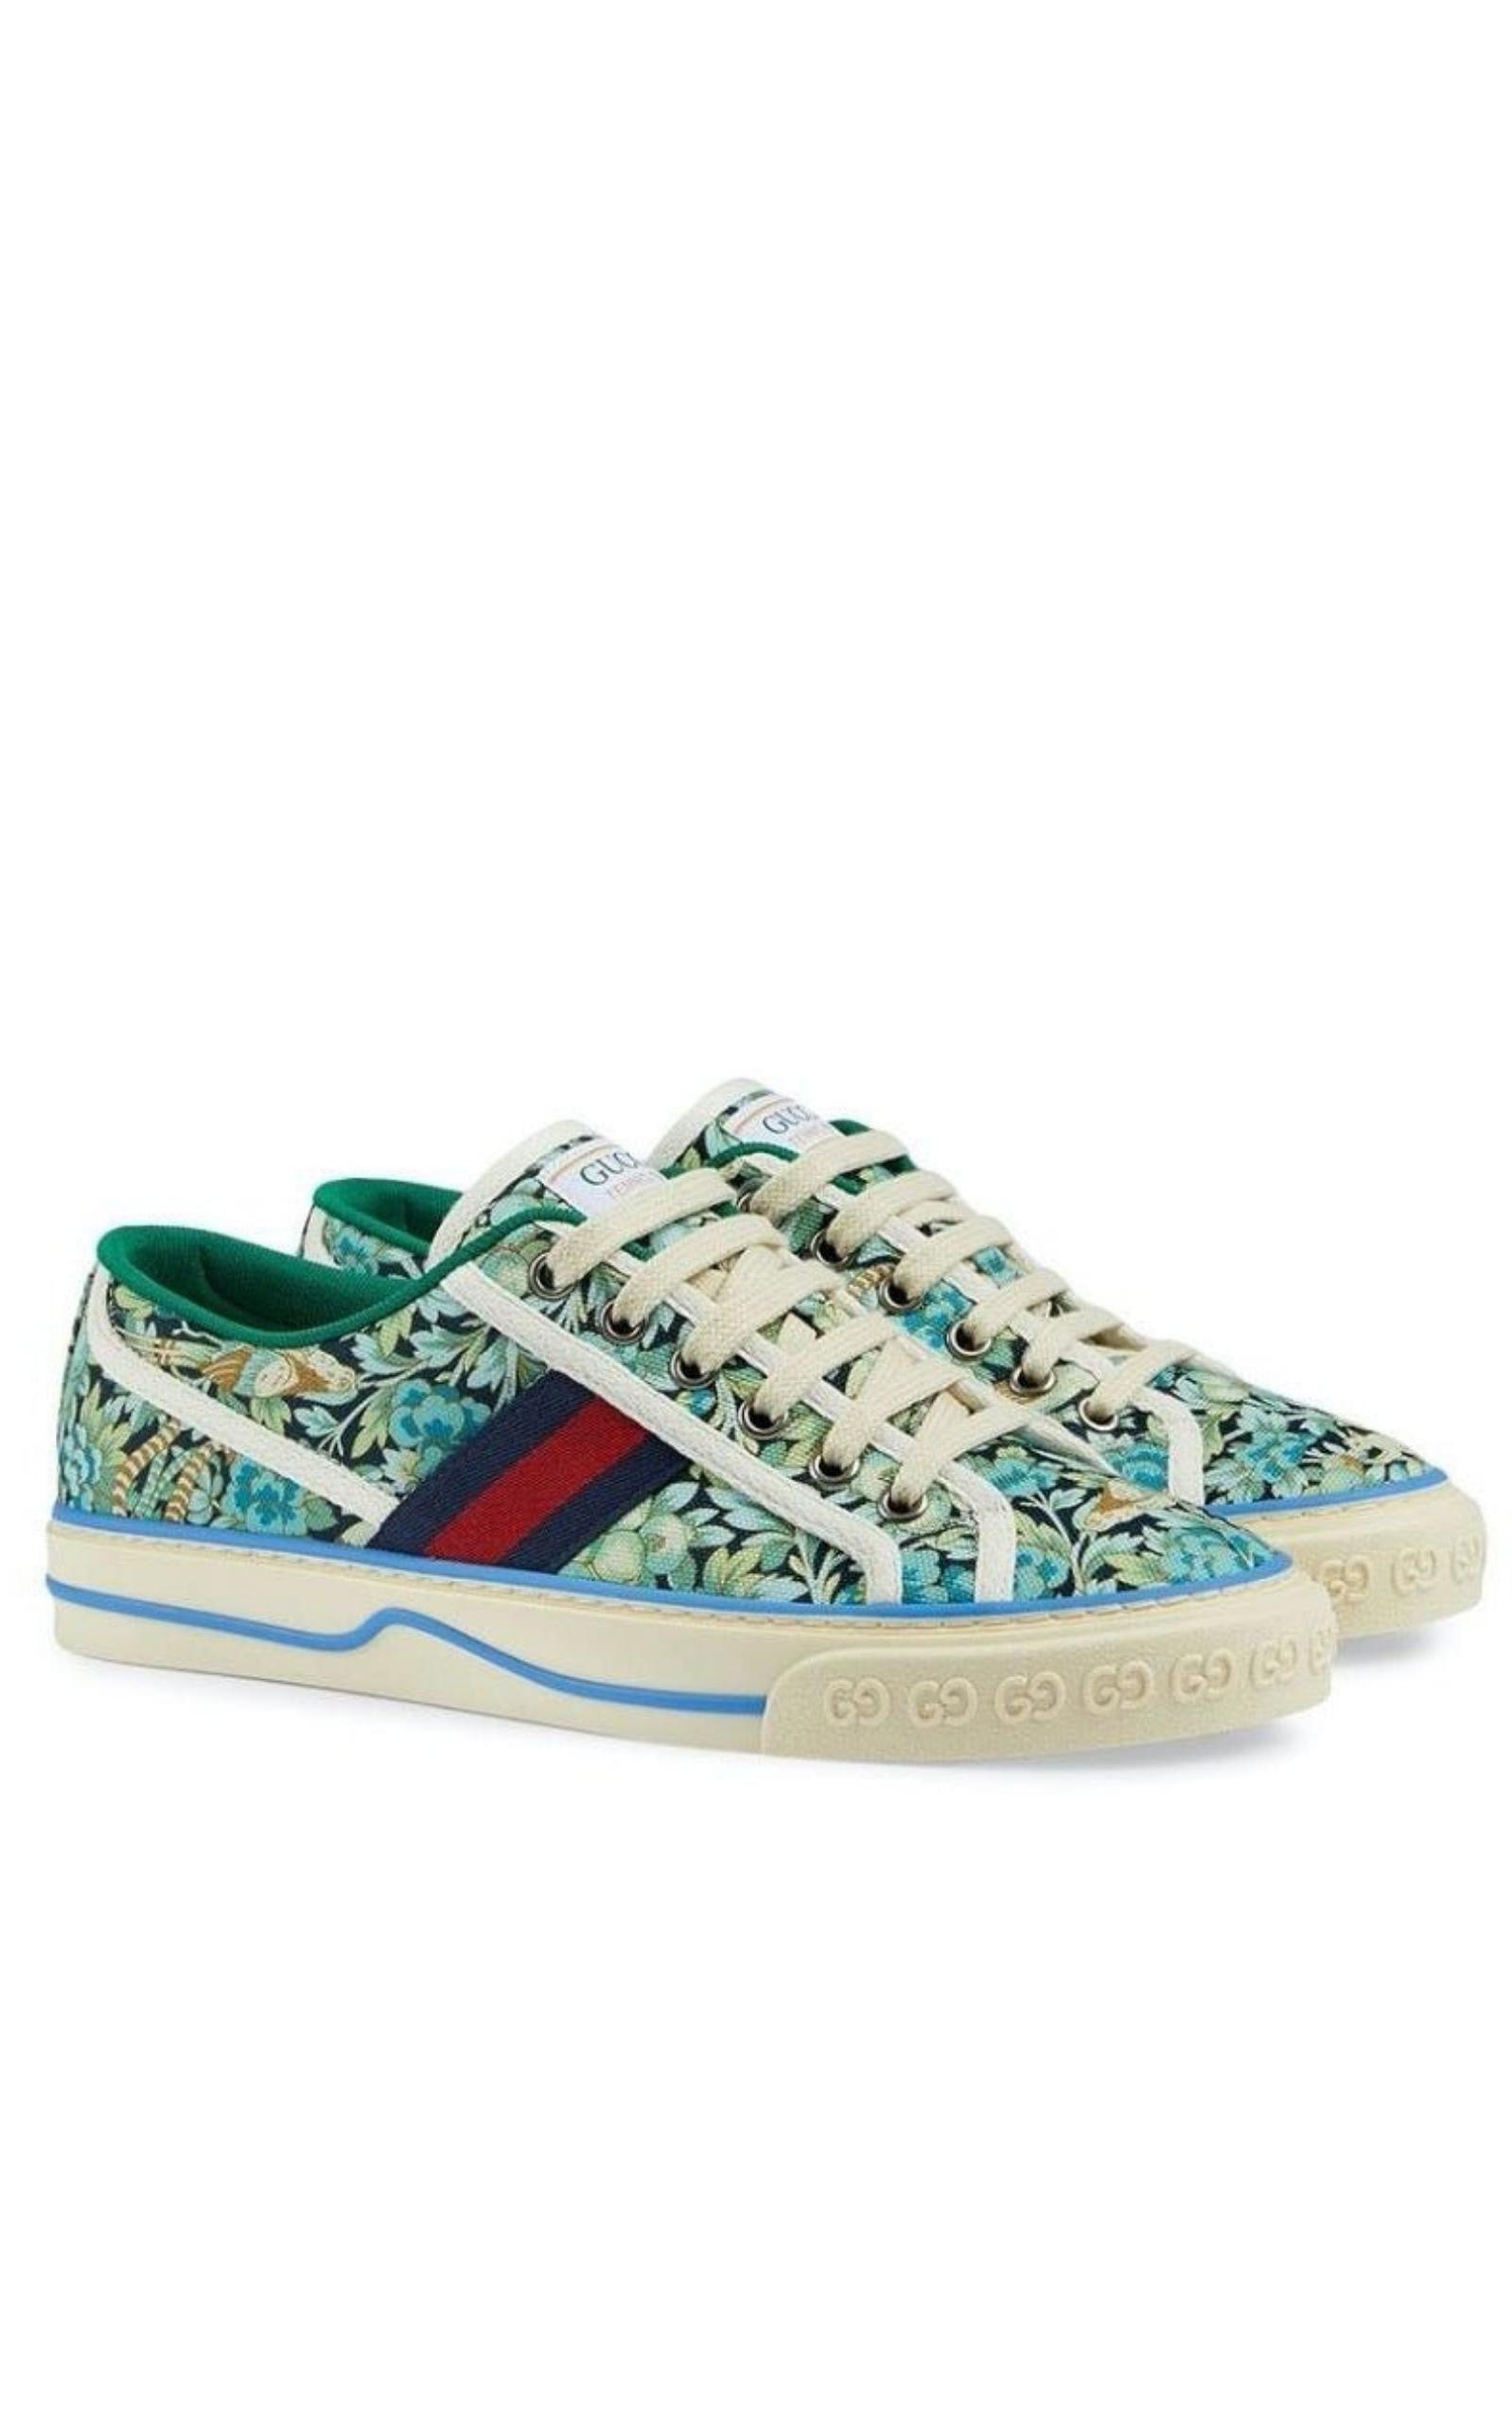 Gucci Liberty of London Womens Tennis 1977 High Top Sneakers 39.5/9-9.5US  627838